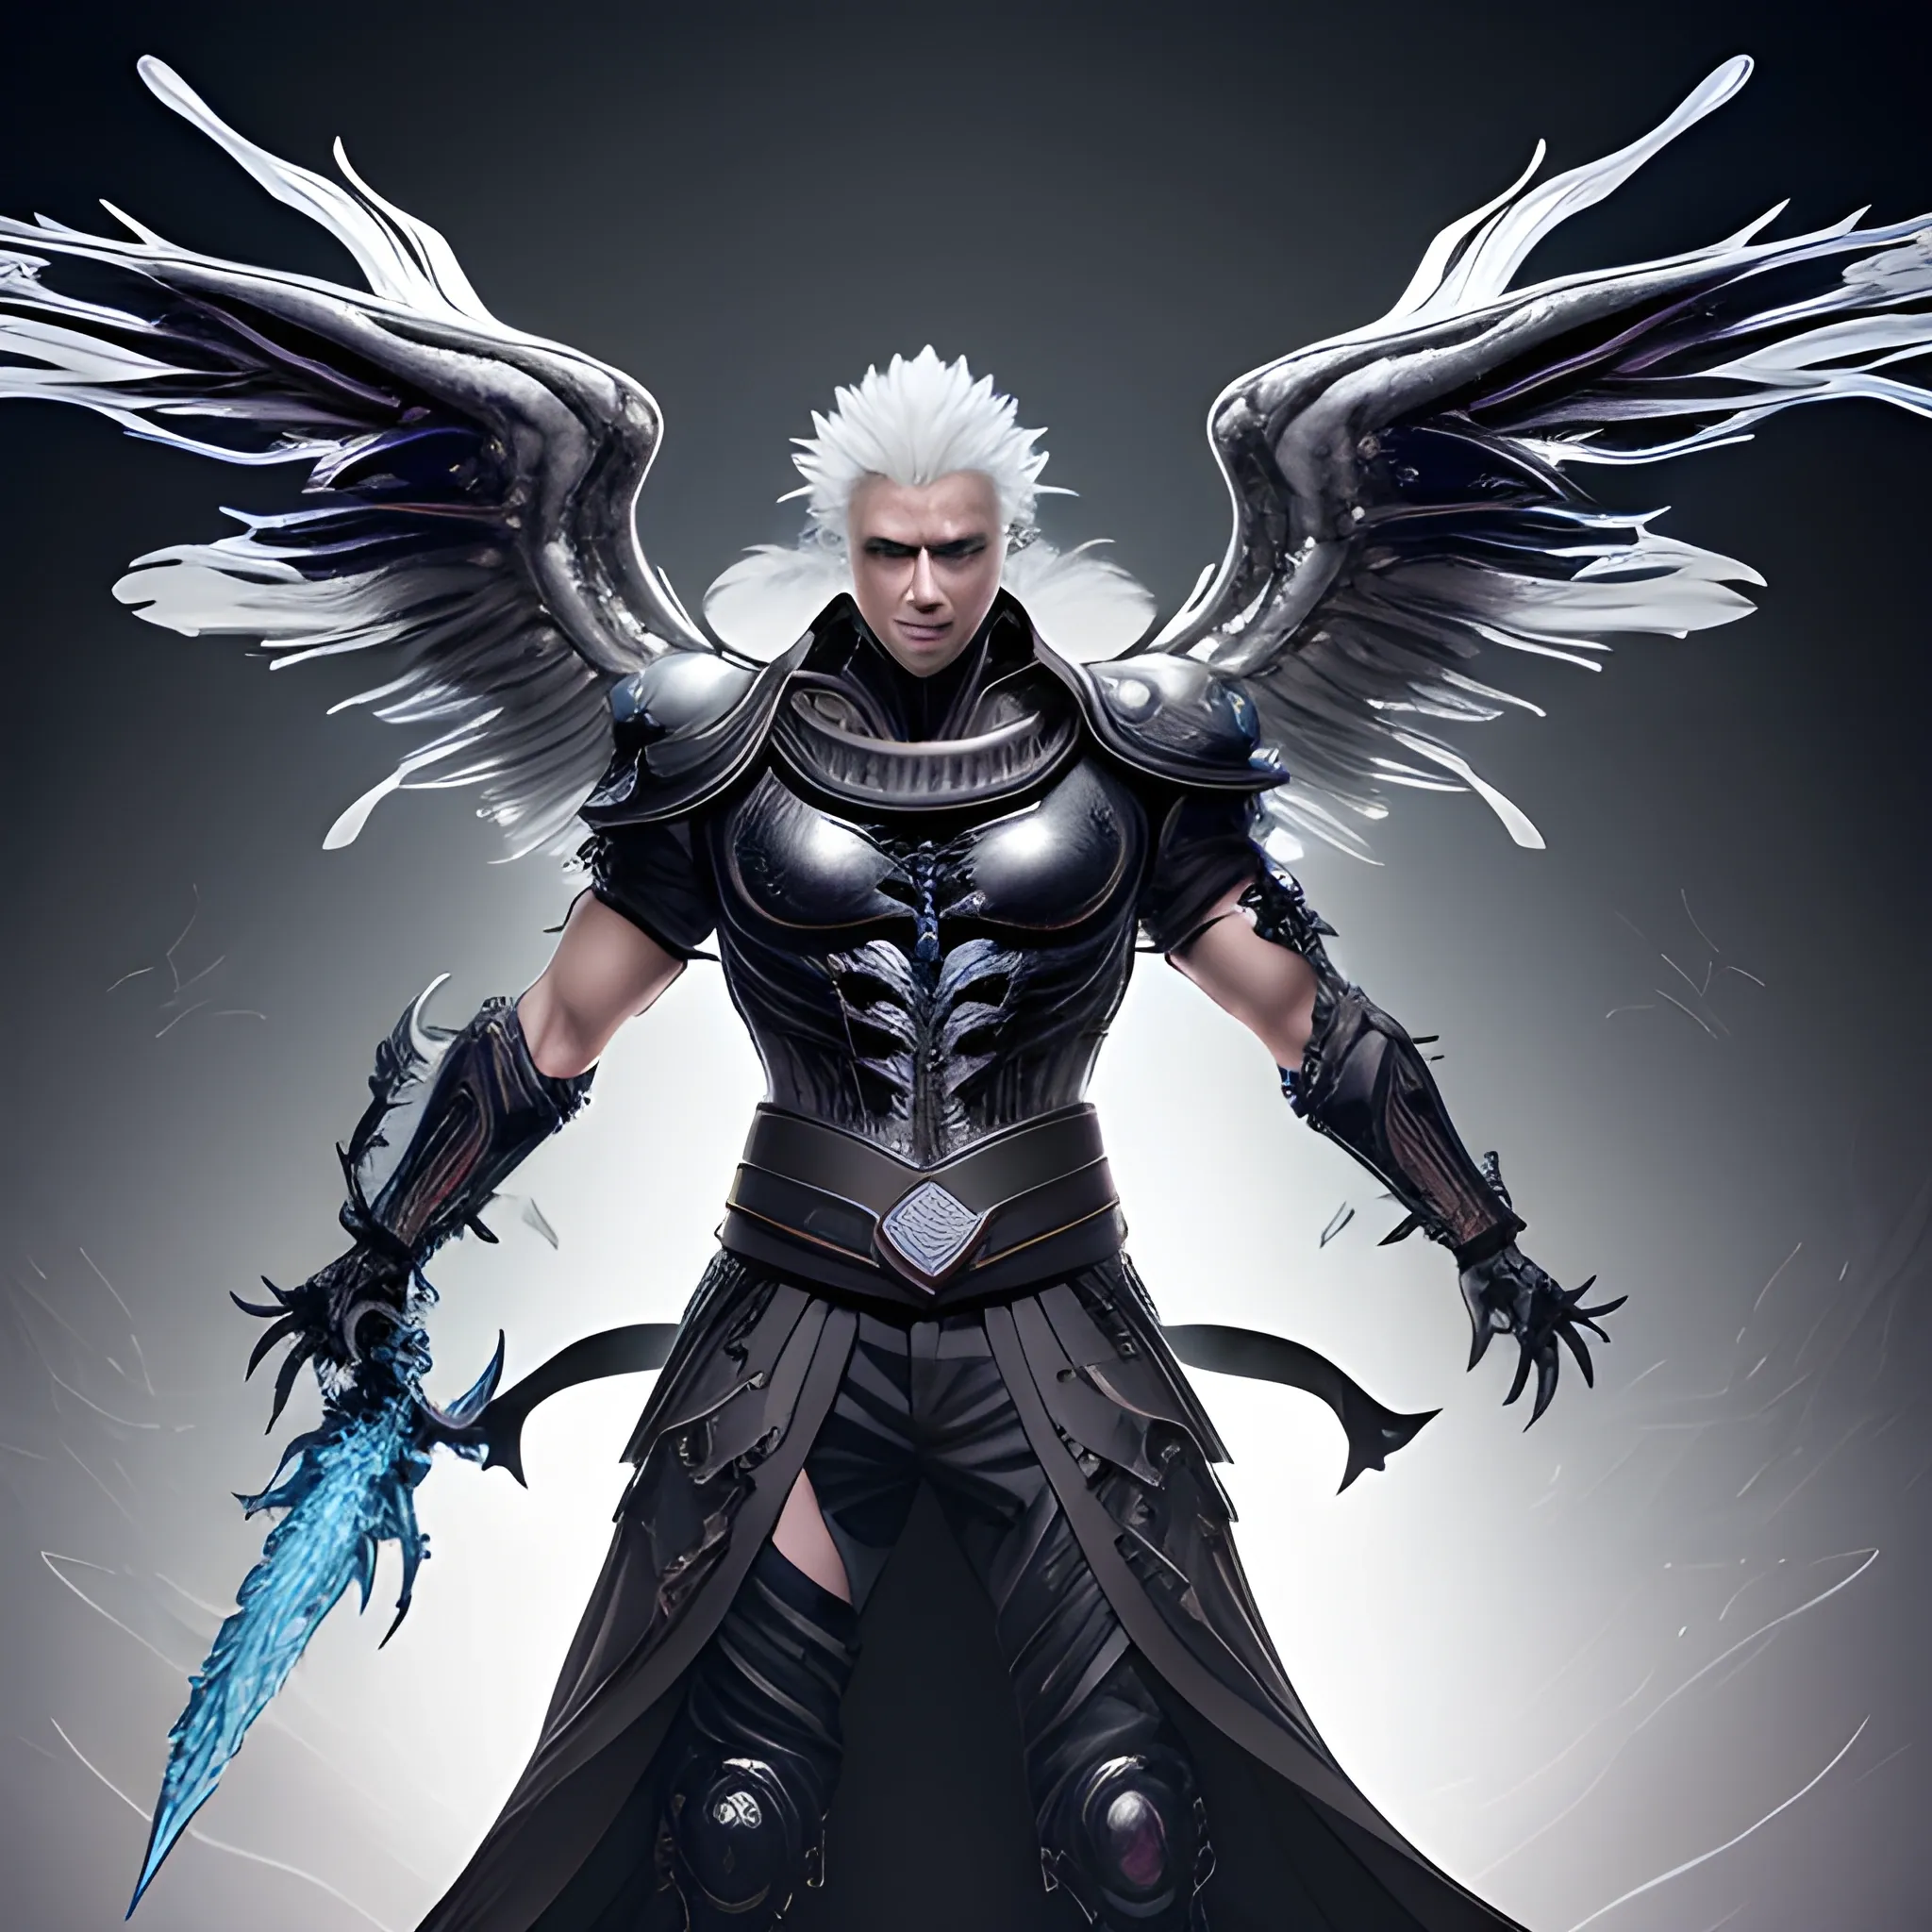 Archangel tyreal from diablo descending from the by Artimator